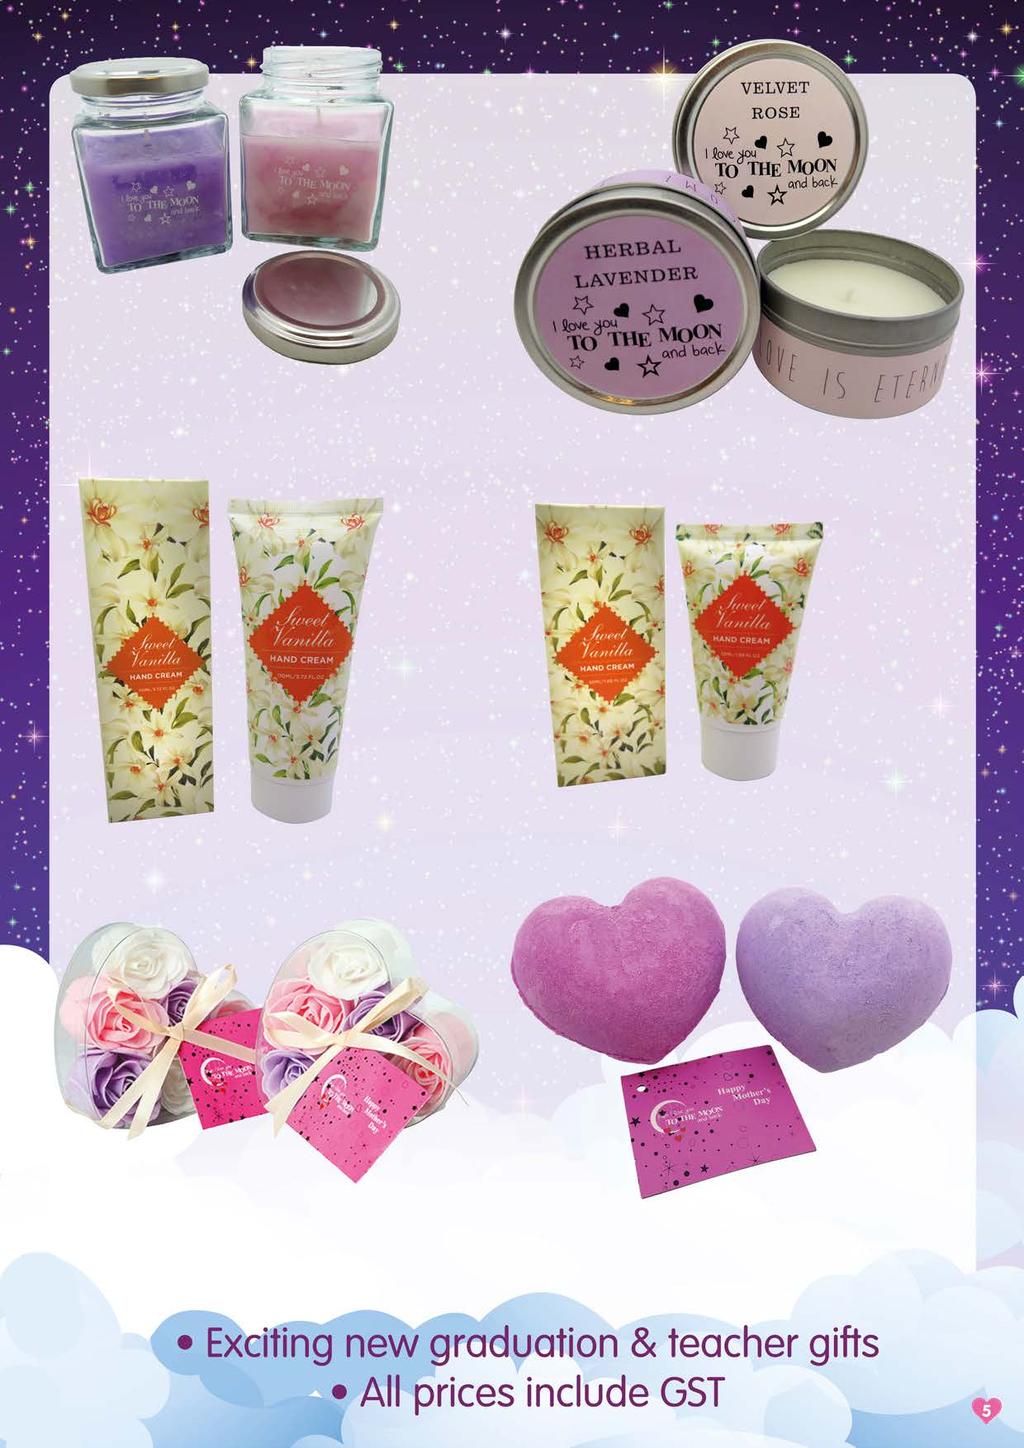 $ 2.30 $ 2.70 JAR GLASS SCENTED CANDLE MD1924 Two designs. (8.5cm x 6cm) Lavender and Rose. TIN SCENTED CANDLE MD1925 Two designs. (7cm x 4cm) Lavender and Rose.